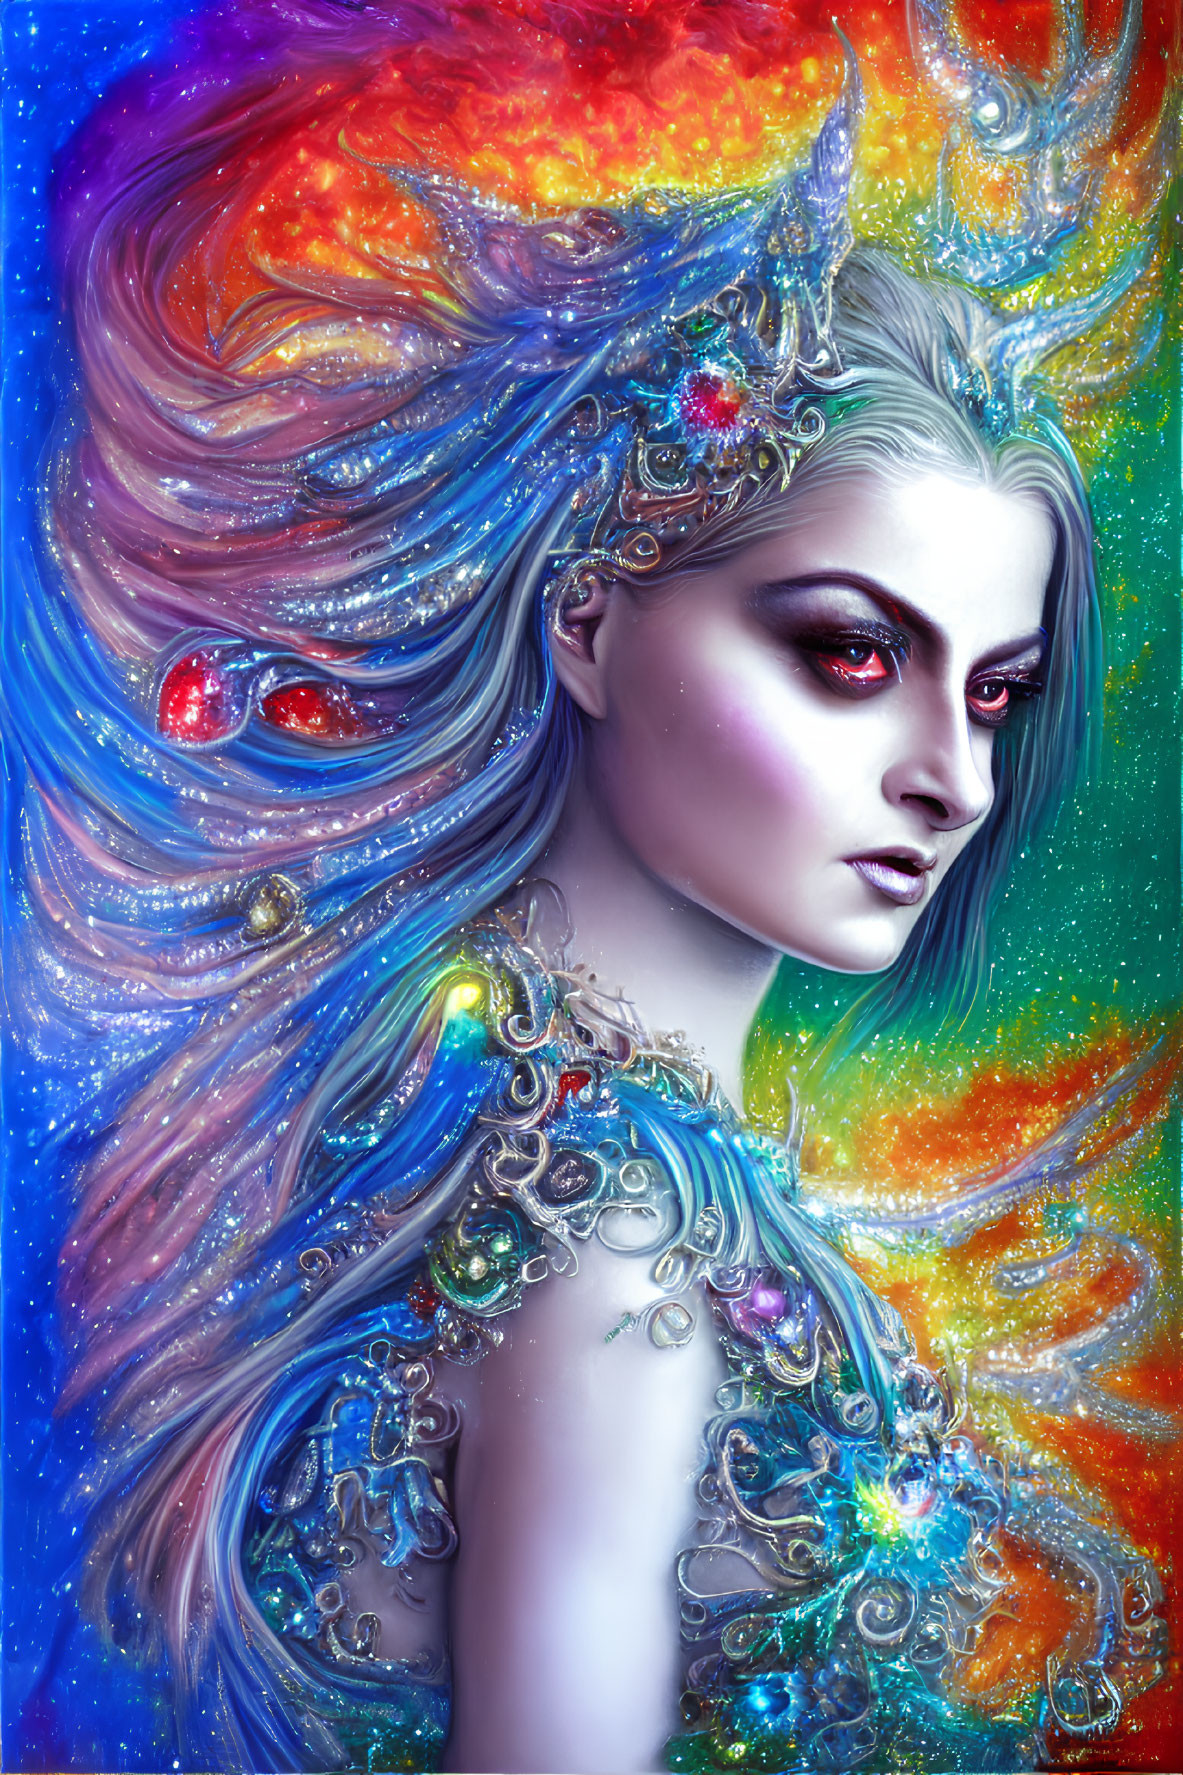 Vibrant Fantasy Portrait of Woman with Cosmic-Inspired Hair